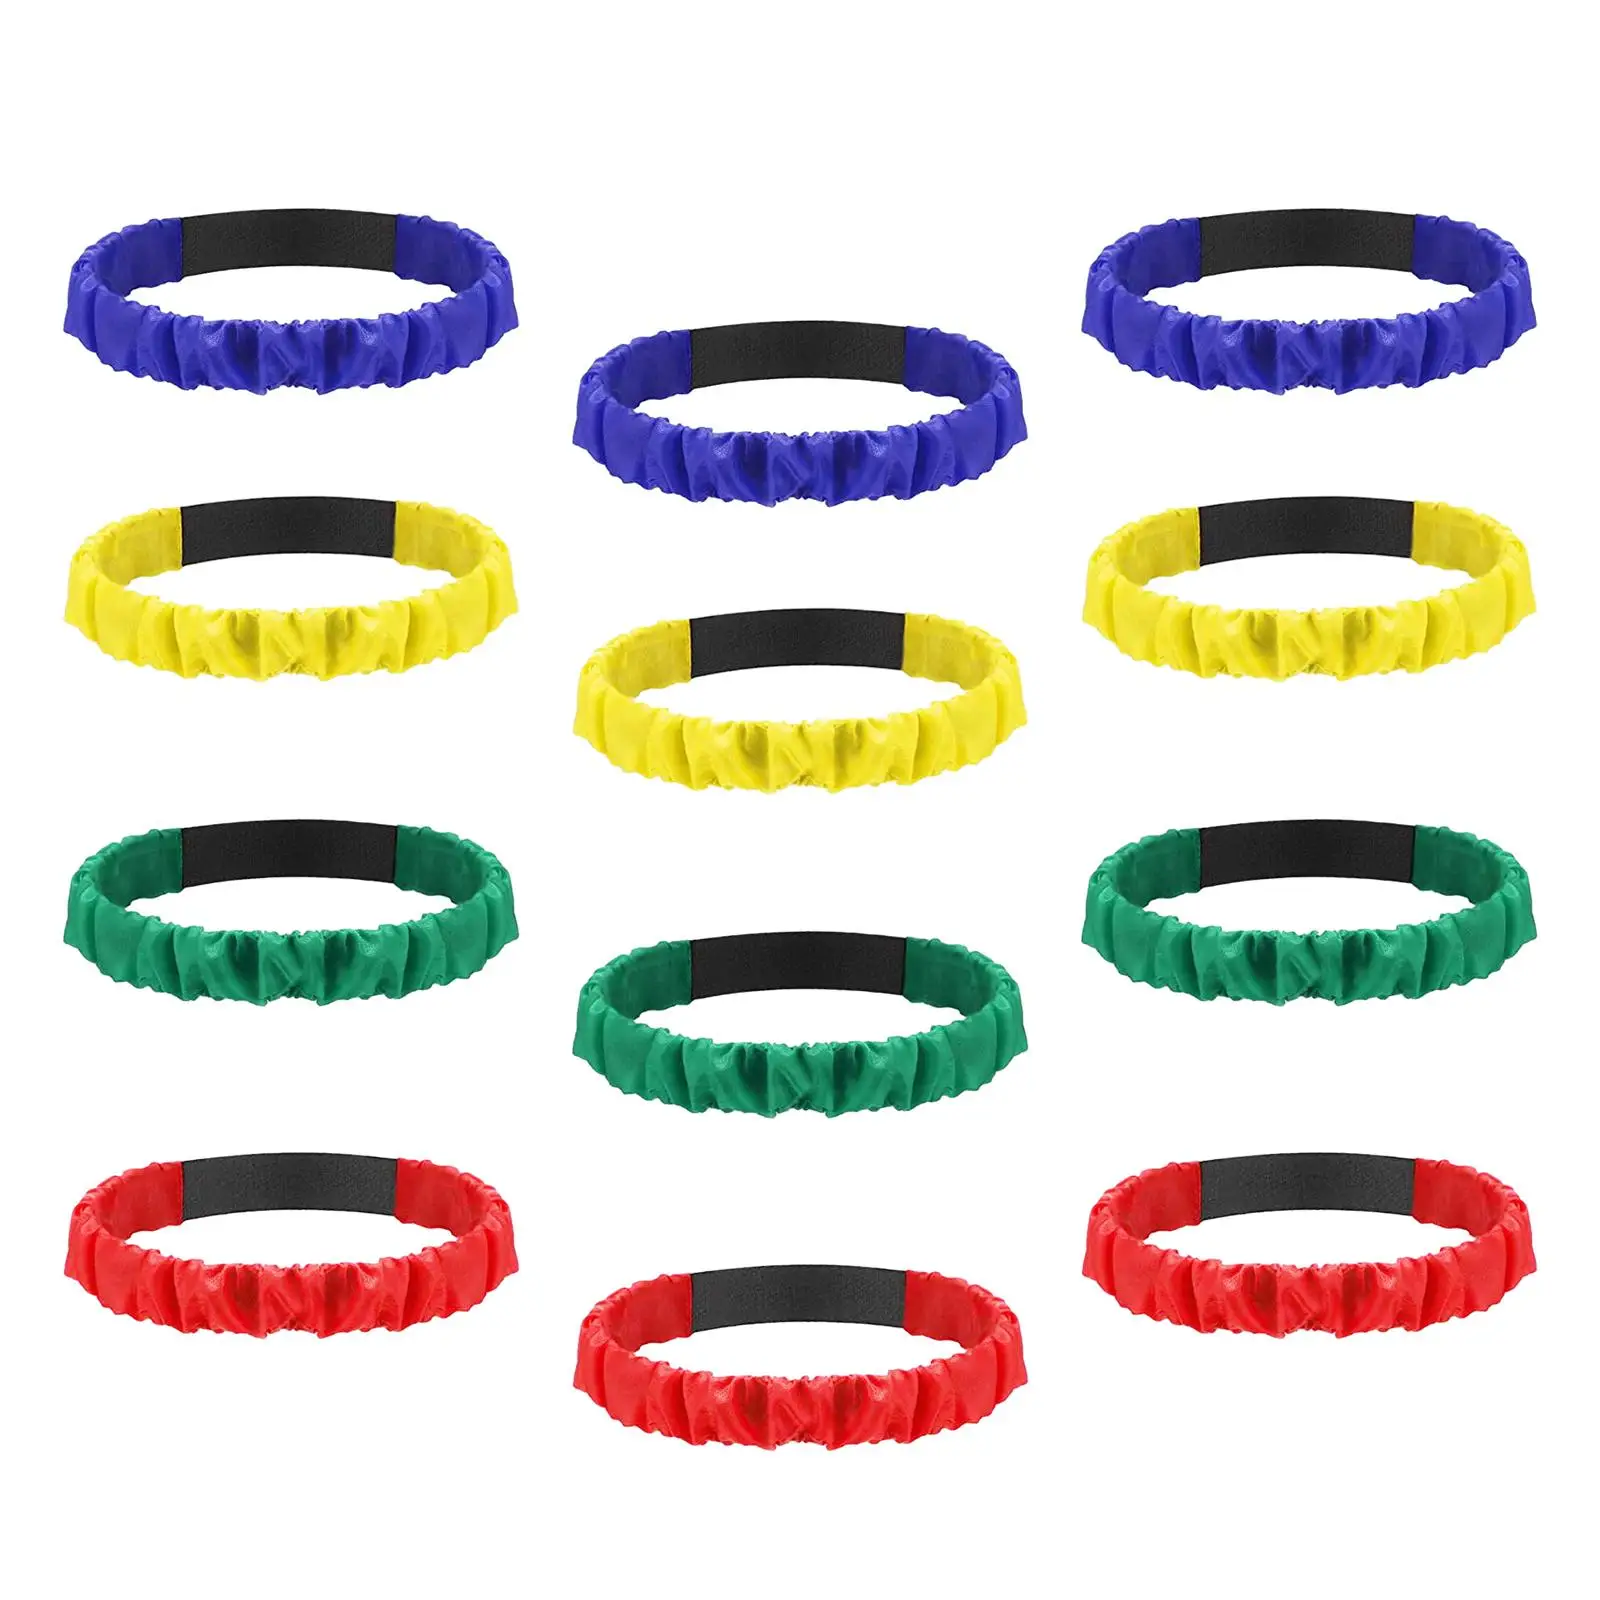 12 Pieces Race Legged Band Teens Family Backyard Activity Game Teamwork Training Team Building Adult Colorful Elastic Tie Strap